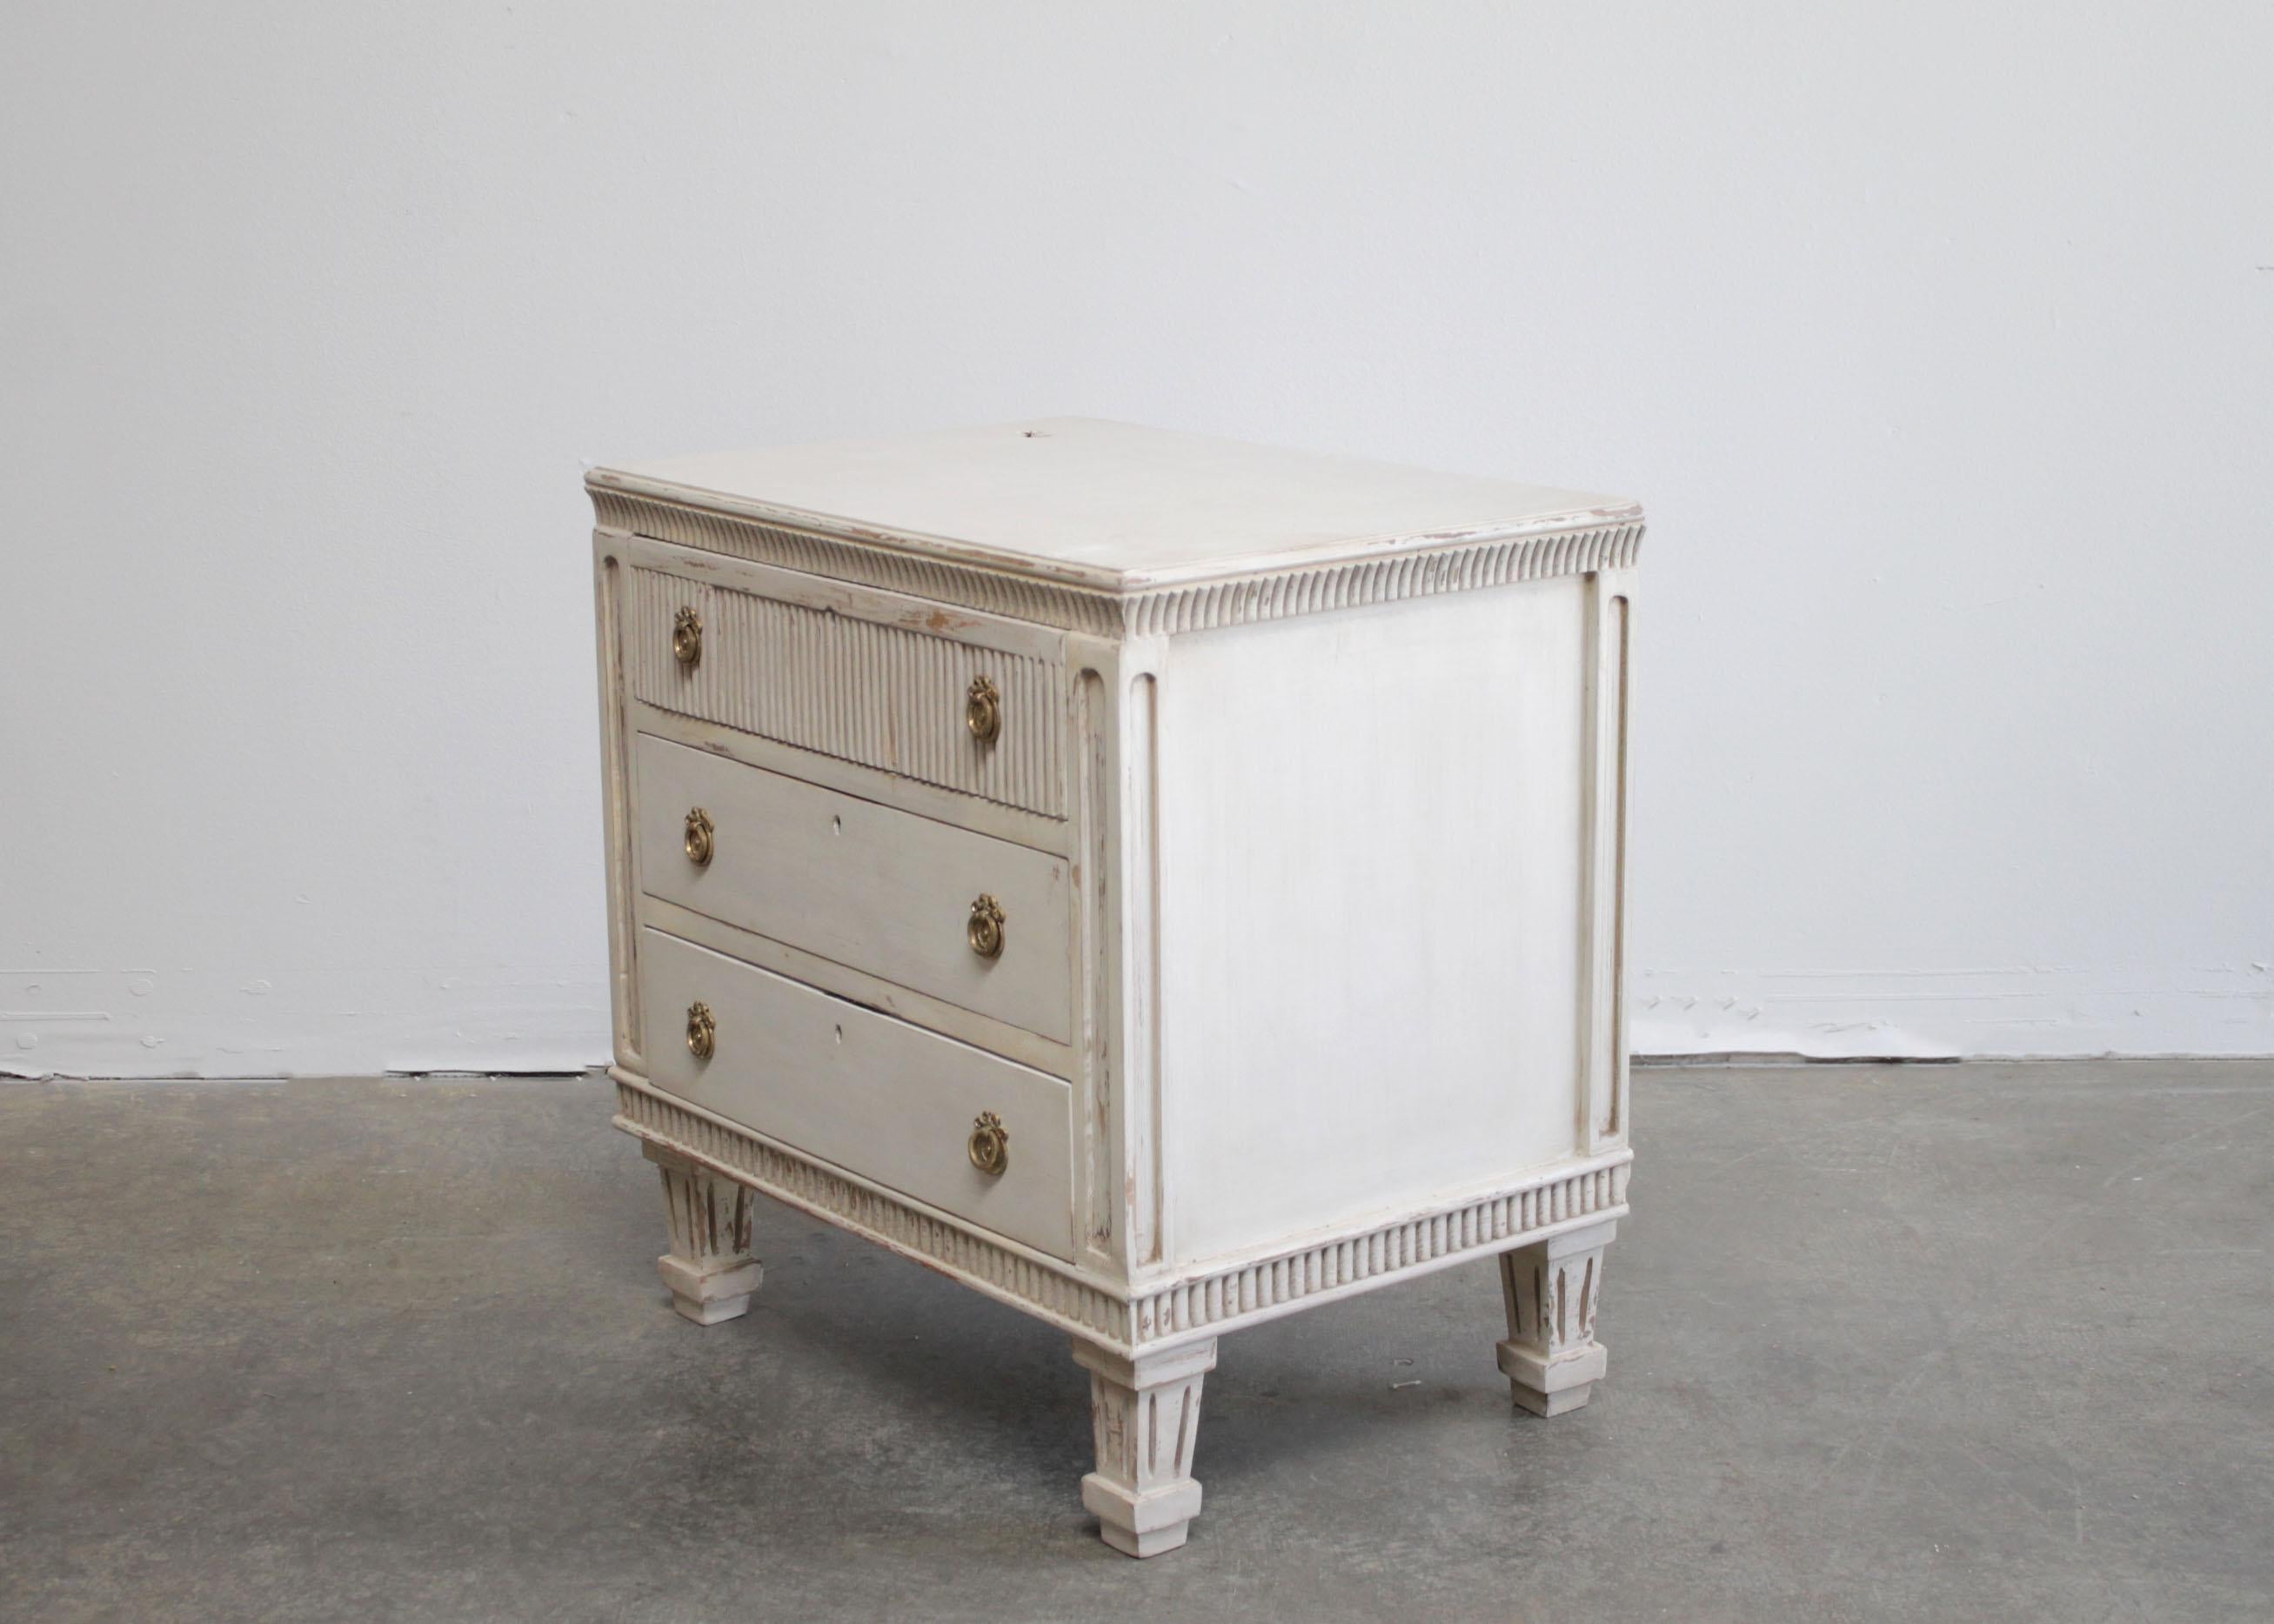 Custom made Swedish style bedside commode
Our Gustavian gray bedside commode was designed after
an antique Swedish commode we found on past trips.
Designed with 3 drawers, the top featuring a reeded drawer face,
and reeded edge top. Painted in a